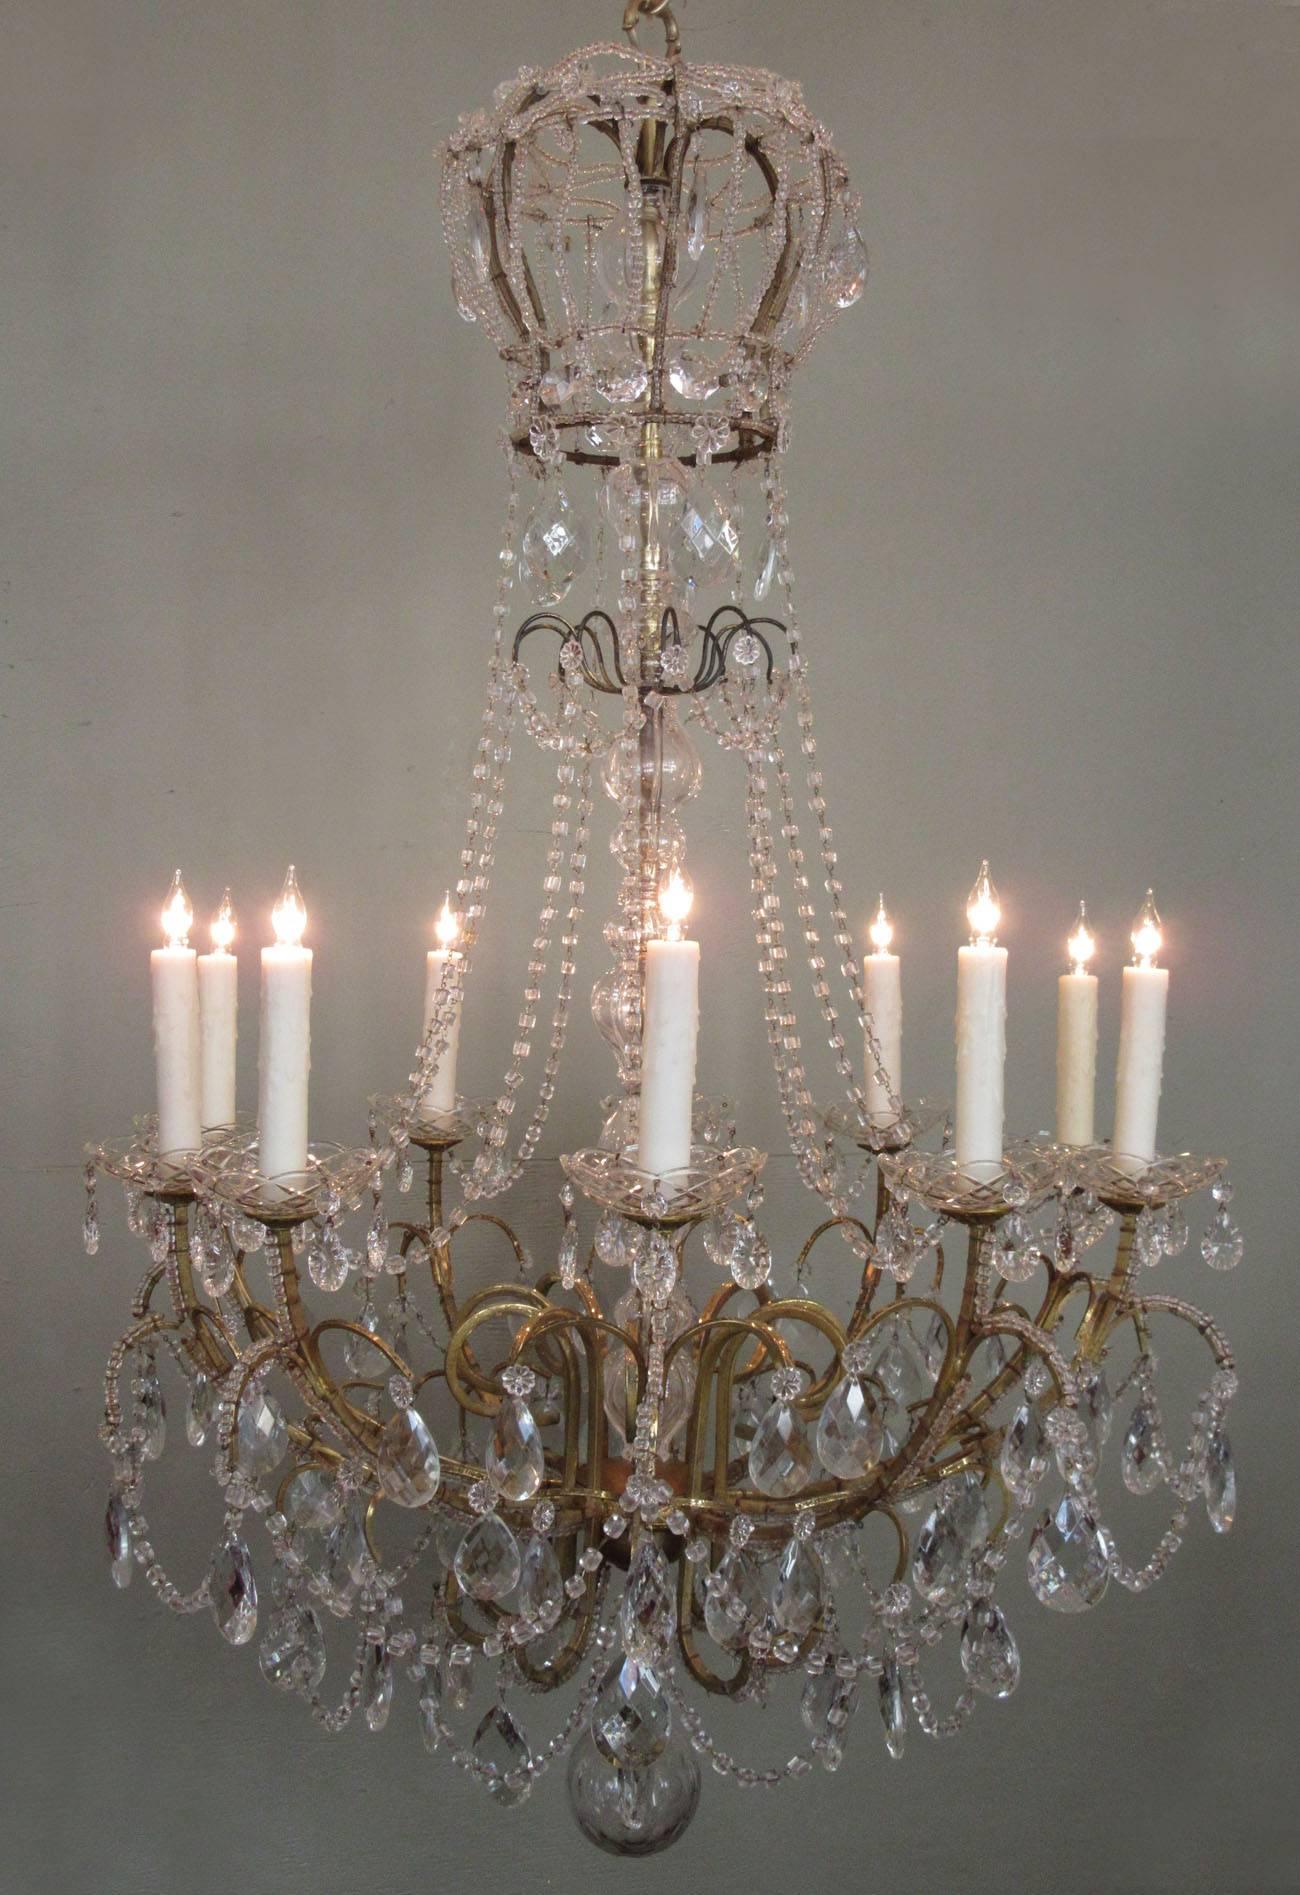 A stunning Italian brass and crystal chandelier, circa 1900, featuring a crystal beaded crown, ten candle arms with crystal bobeche and crystal beaded swag and pendants. The chandelier has recently been cleaned and rewired with new porcelain sockets.